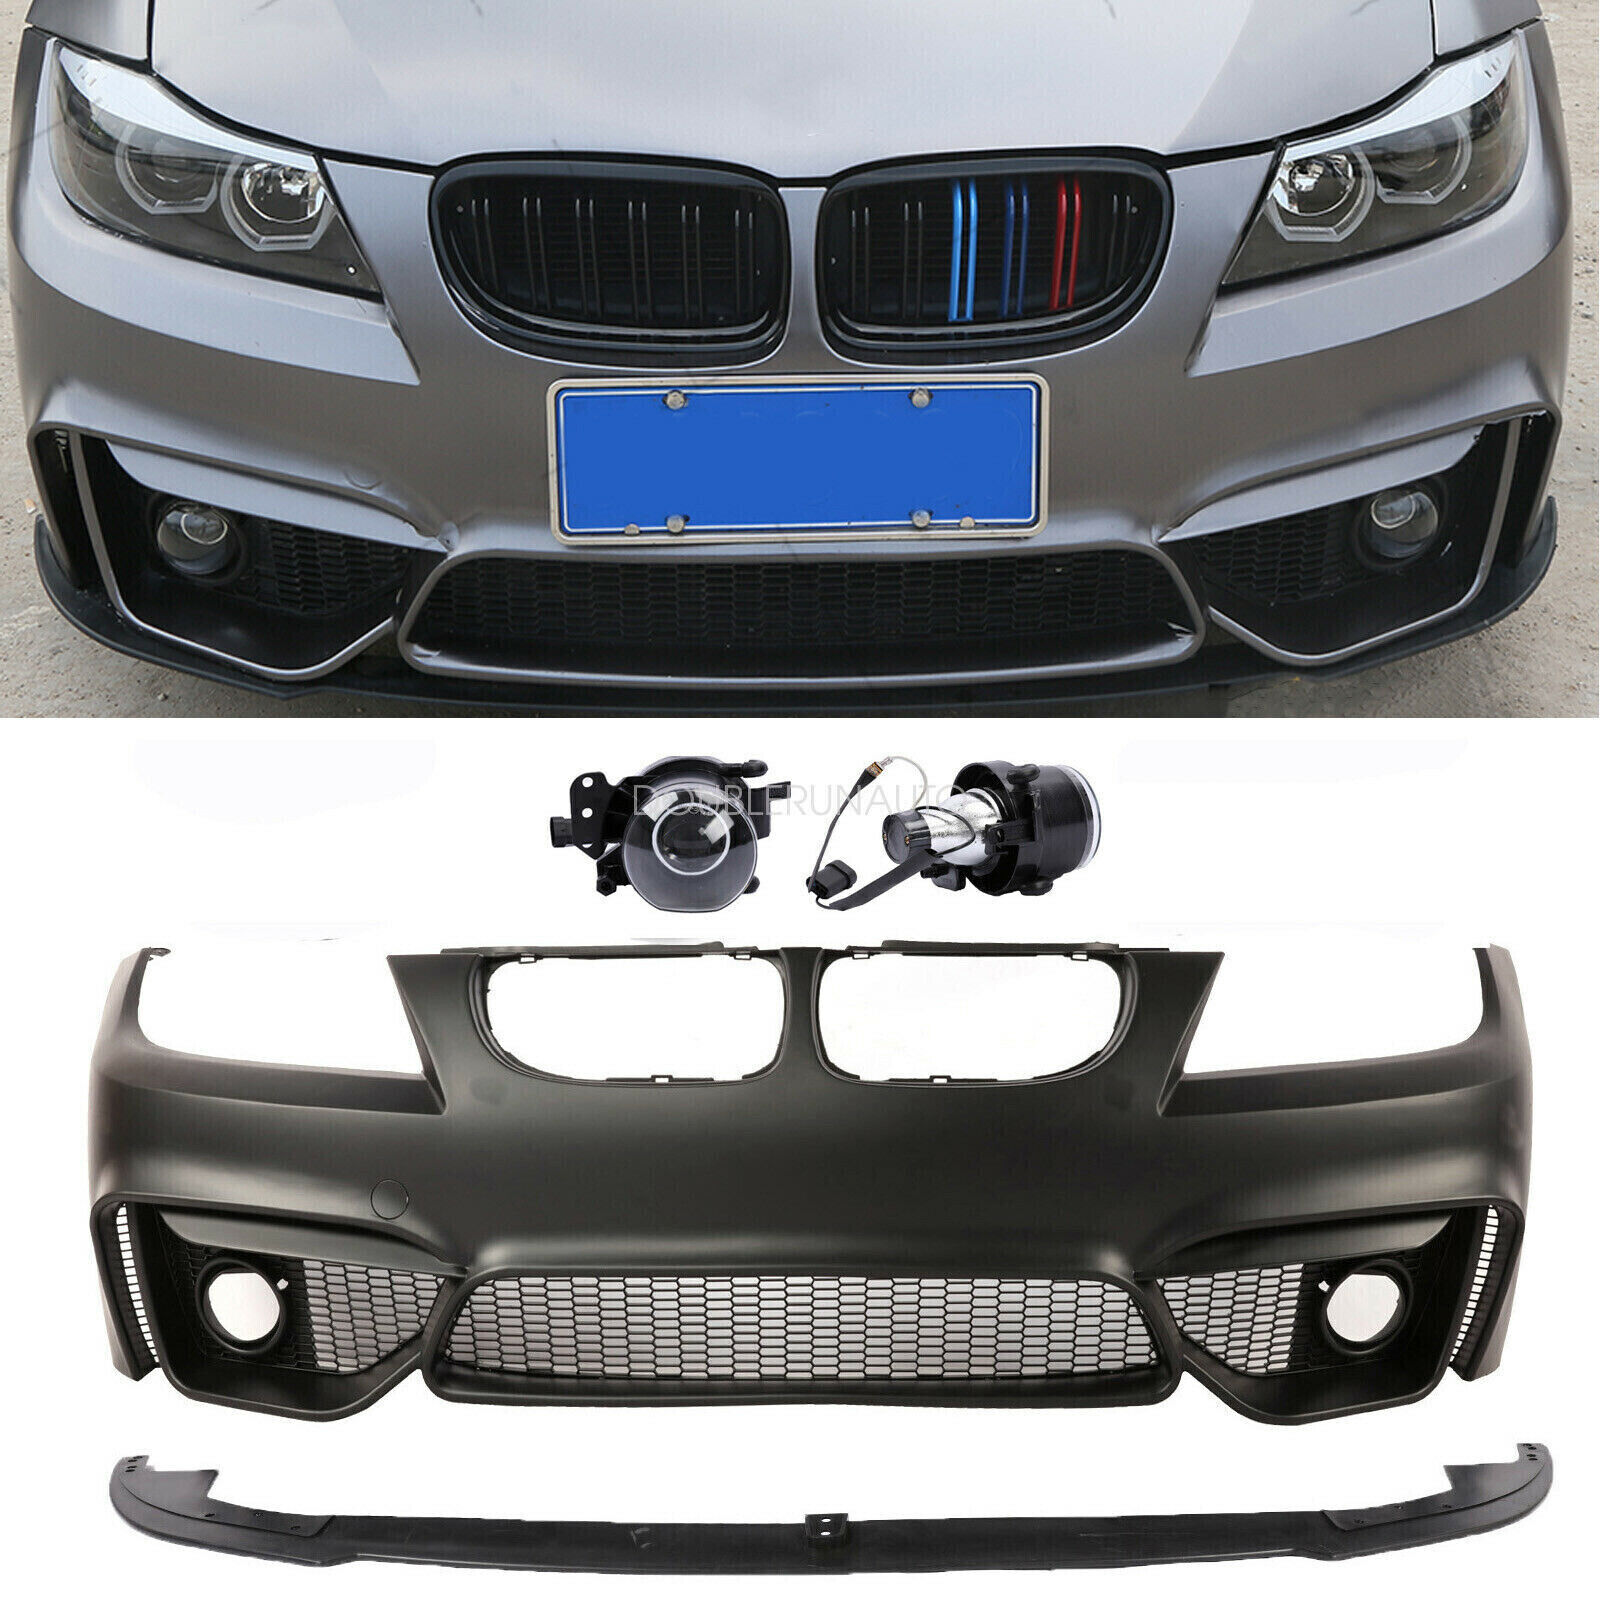 F80 M4 Style Look Front Bumper  For BMW 3 Series E90 4DR 08-11 W/O PDC holes